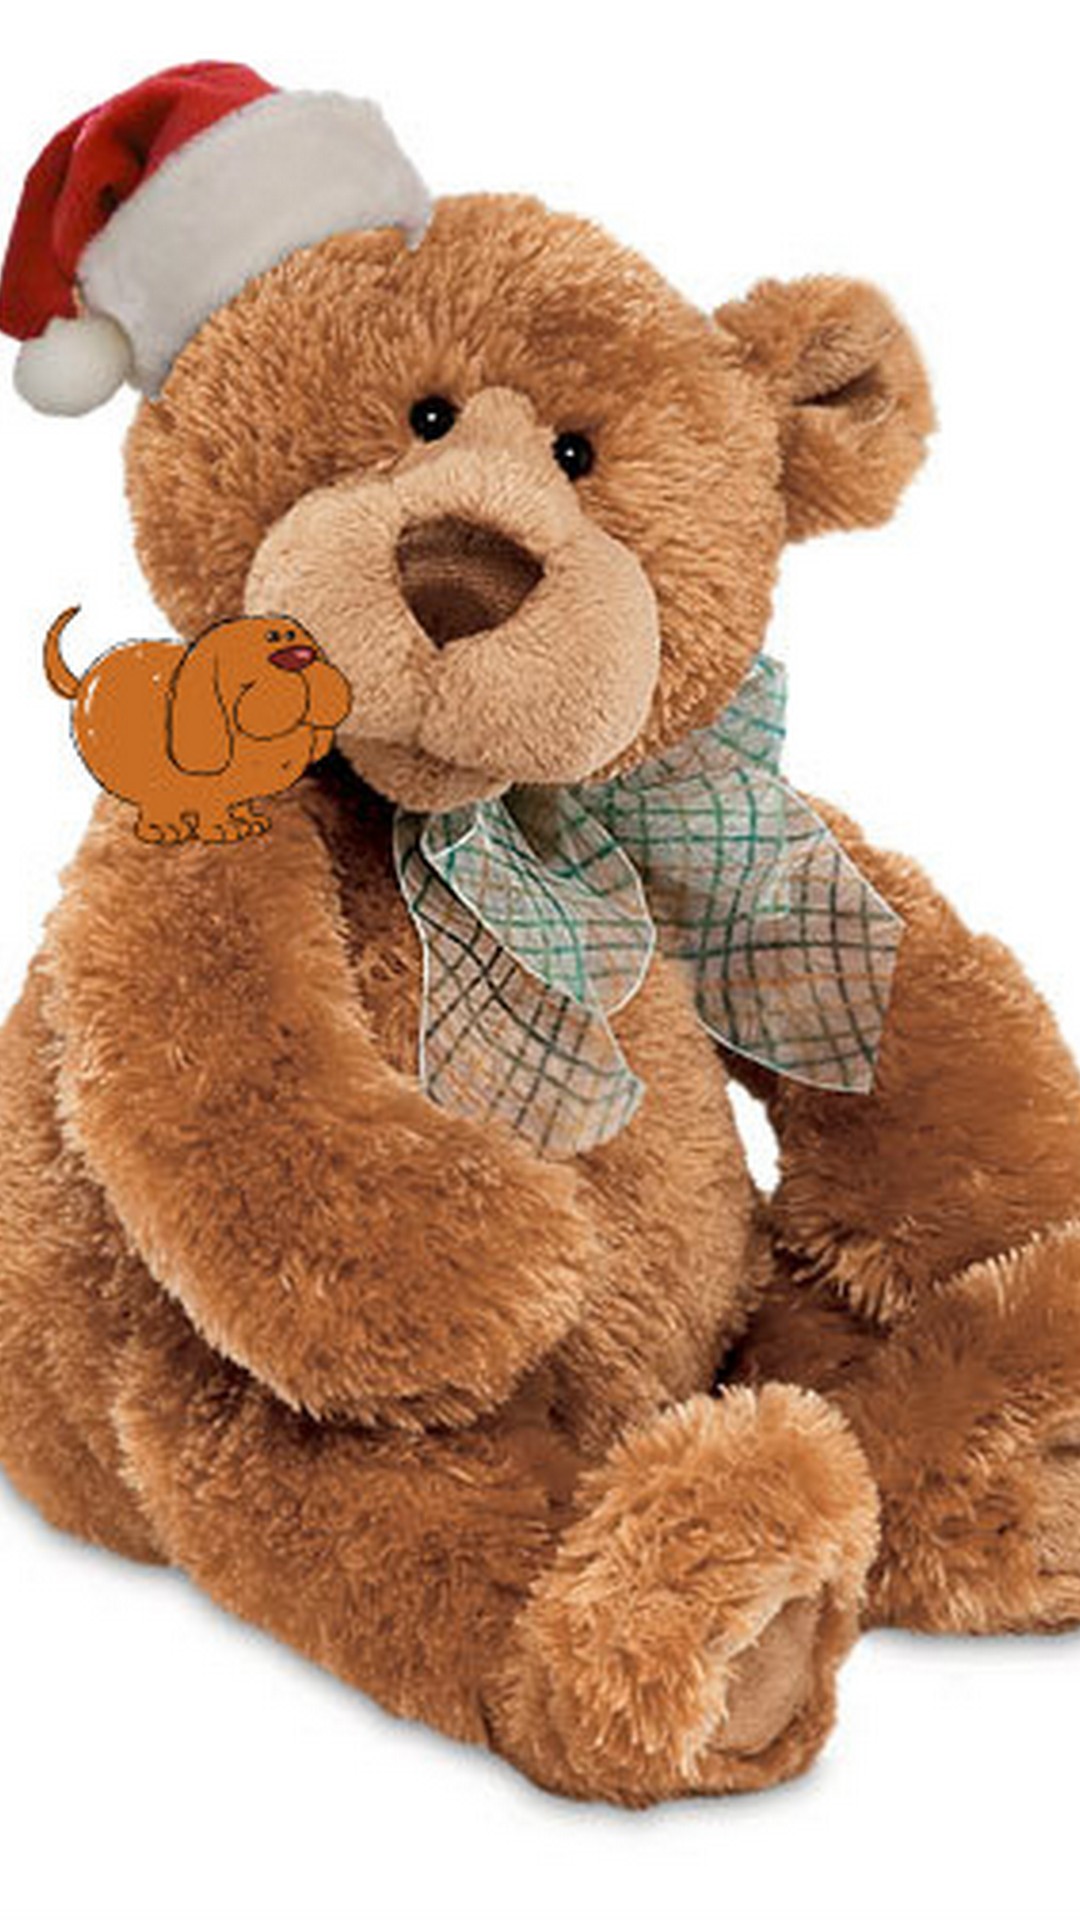 Teddy Bear Big Android Wallpaper with image resolution 1080x1920 pixel. You can make this wallpaper for your Android backgrounds, Tablet, Smartphones Screensavers and Mobile Phone Lock Screen